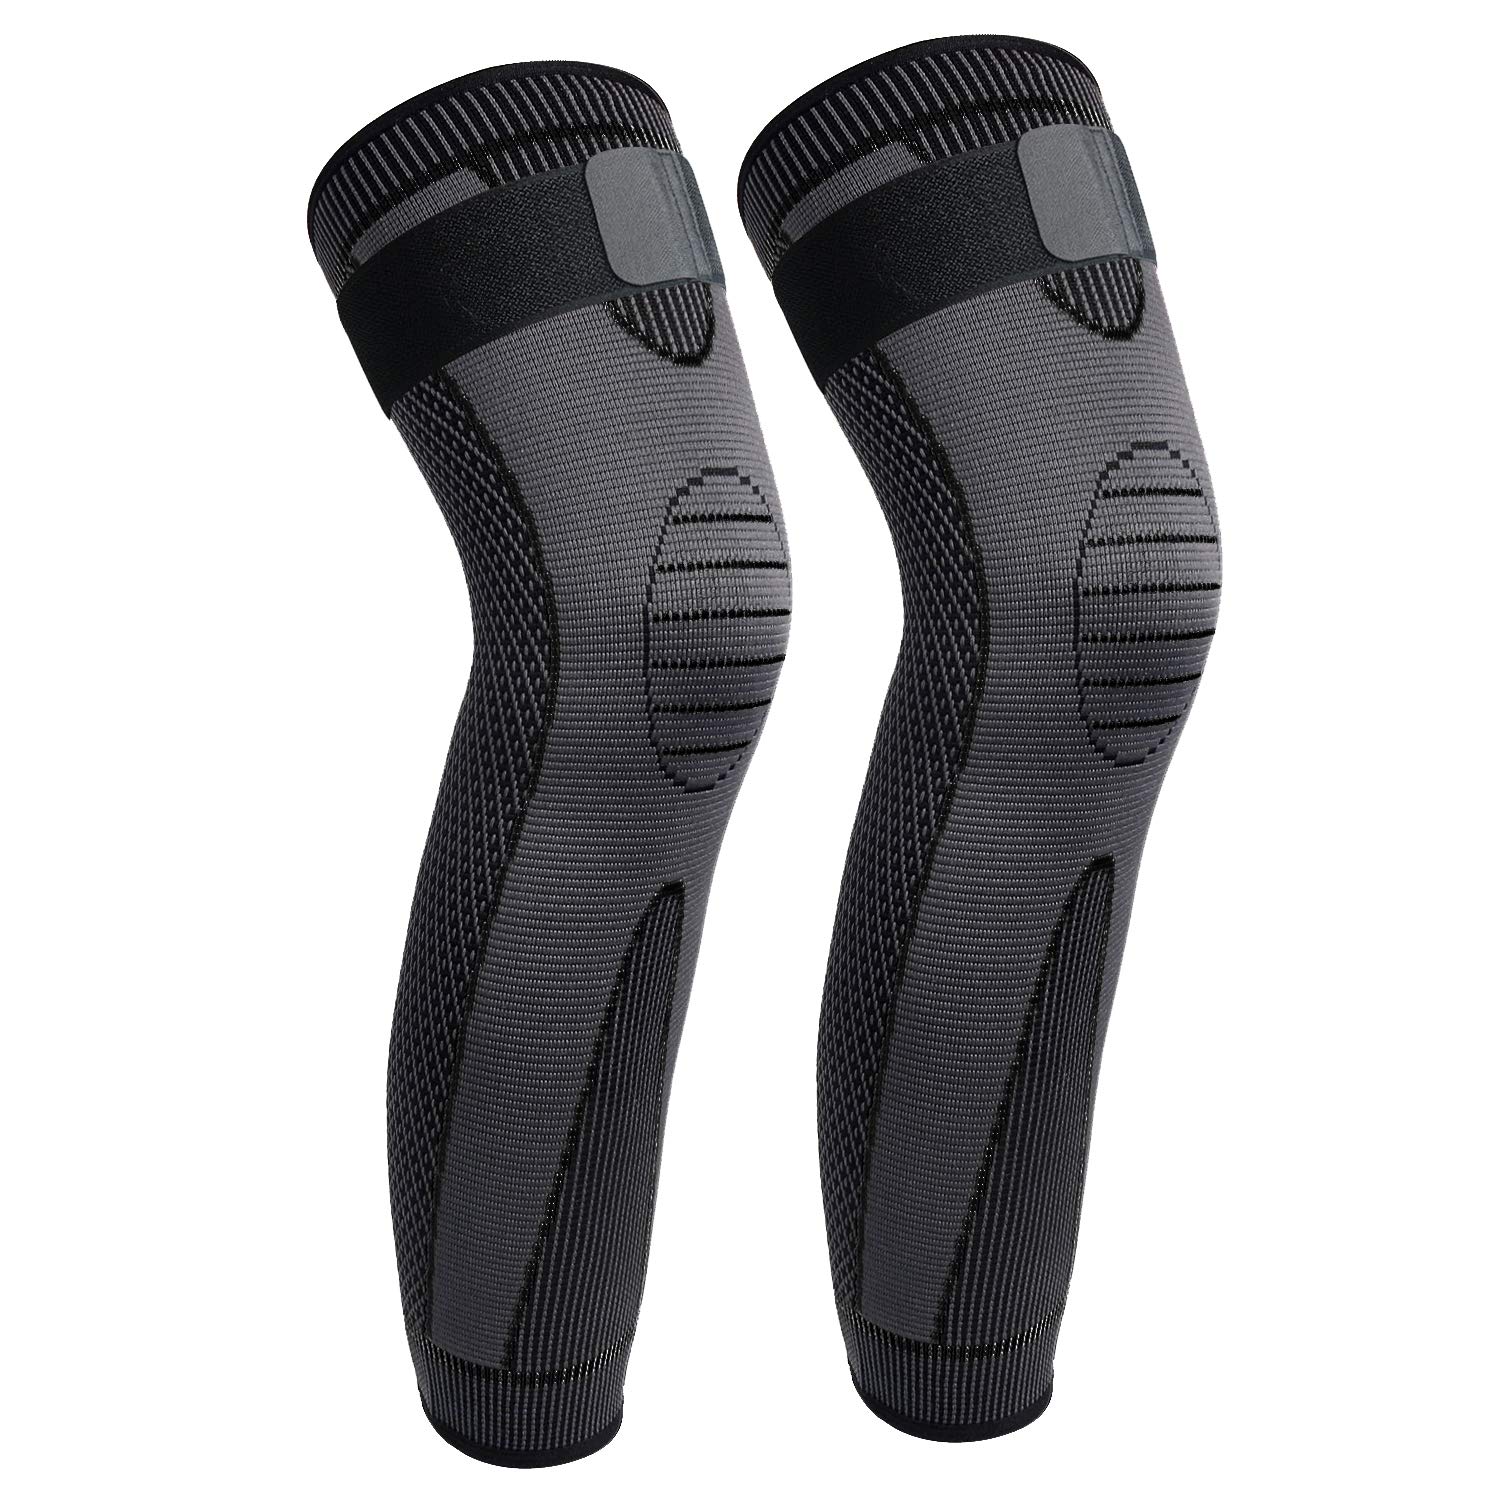 Full Leg Sleeves Long Compression Leg Sleeve Knee Sleeves Protect Leg, for  Man Women Basketball, Arthritis Cycling Sport Football, Reduce Varicose  Veins and Swelling of Legs(Pair) Black-Updated 3X-Large (1 Pair)